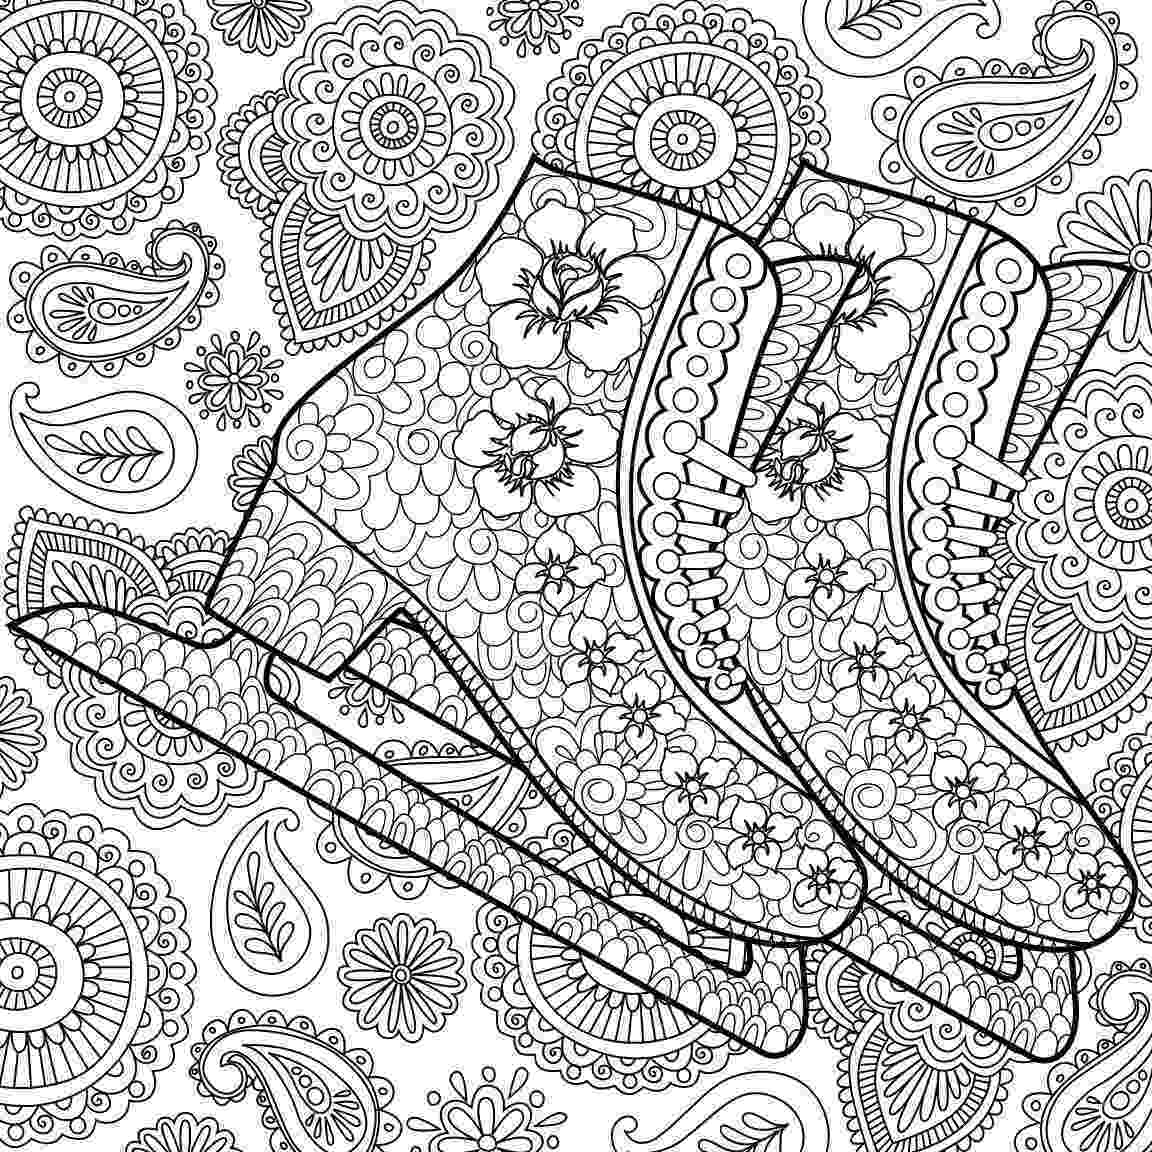 color zentangle printable coloring page zentangle figure skating coloring zentangle color 